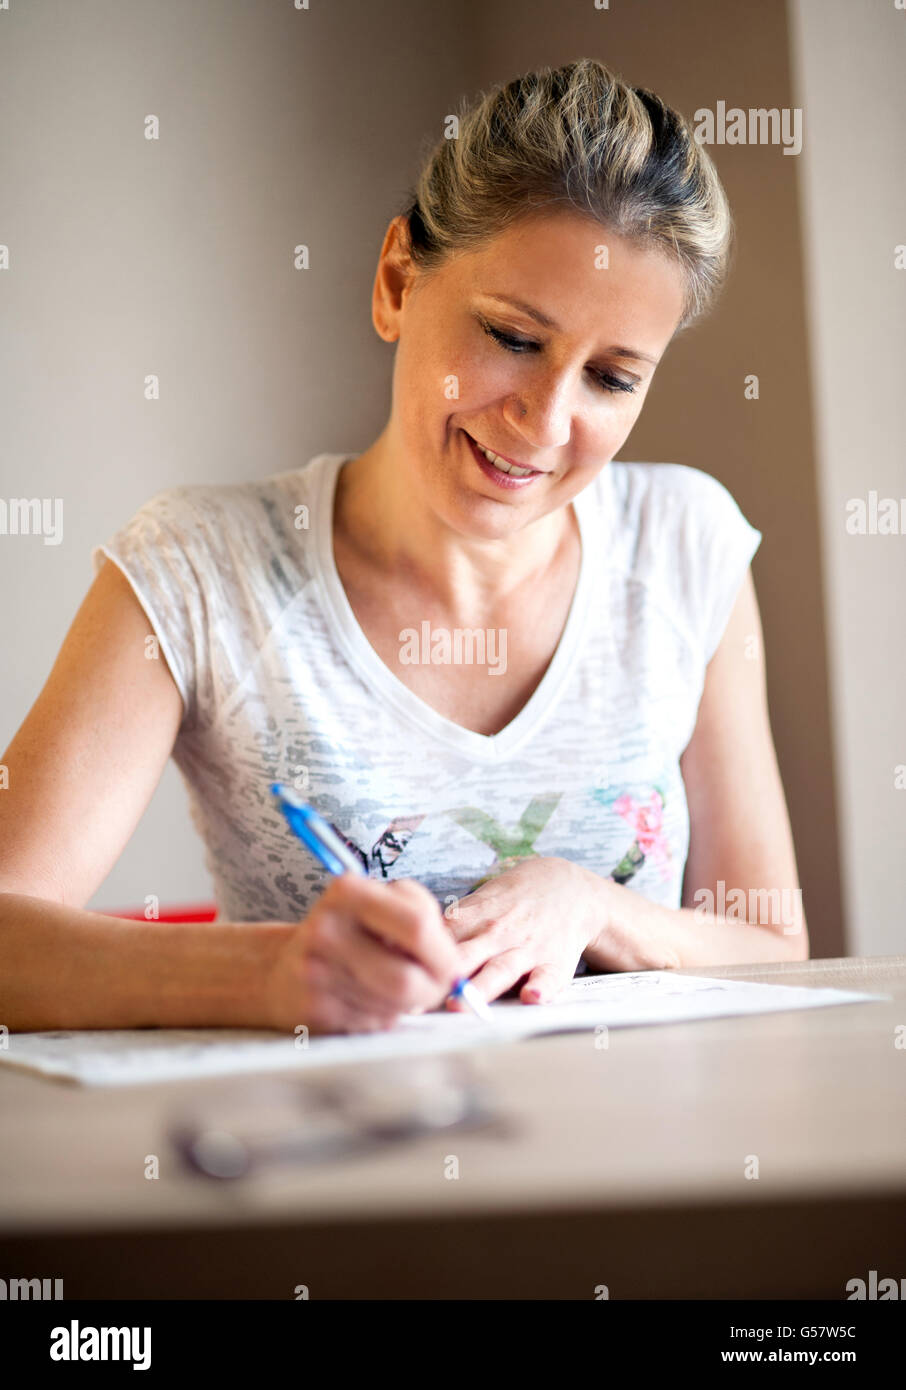 Single beautiful mature woman with pretty smile and tied back hair writing notes or filling out a form with pen at table indoors Stock Photo